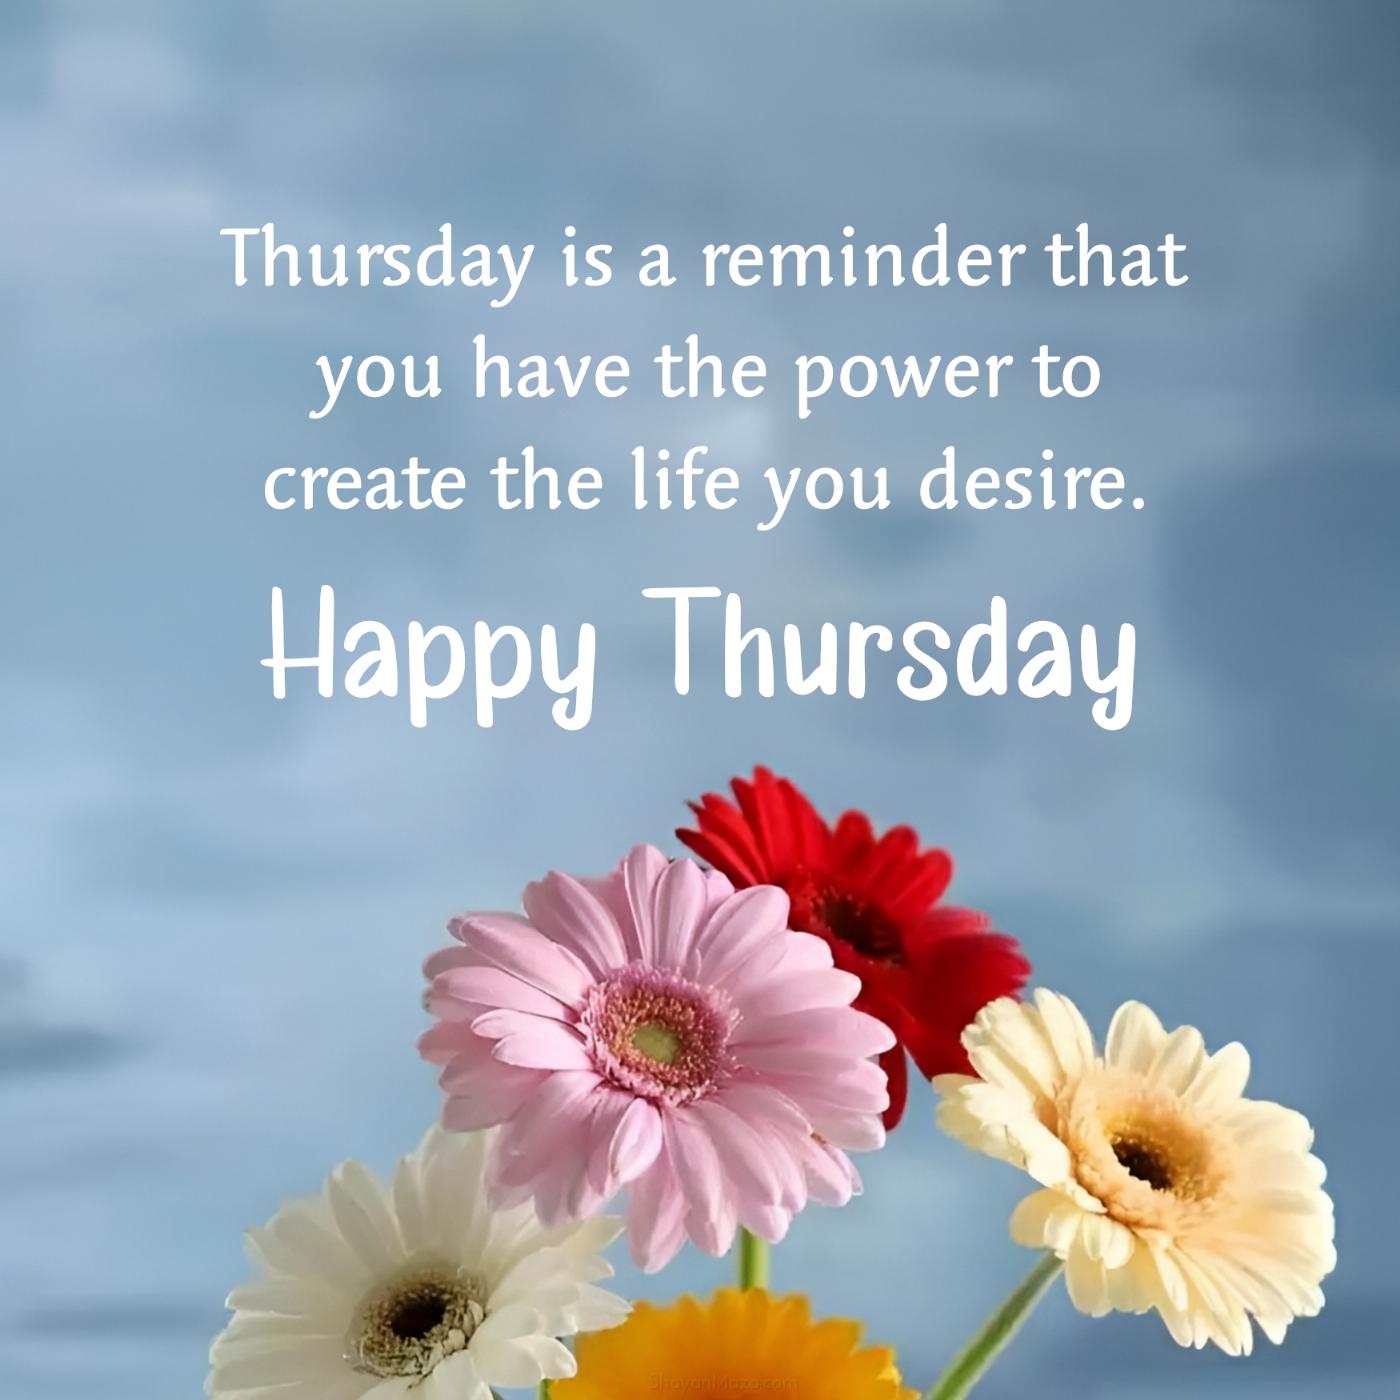 Thursday is a reminder that you have the power to create the life